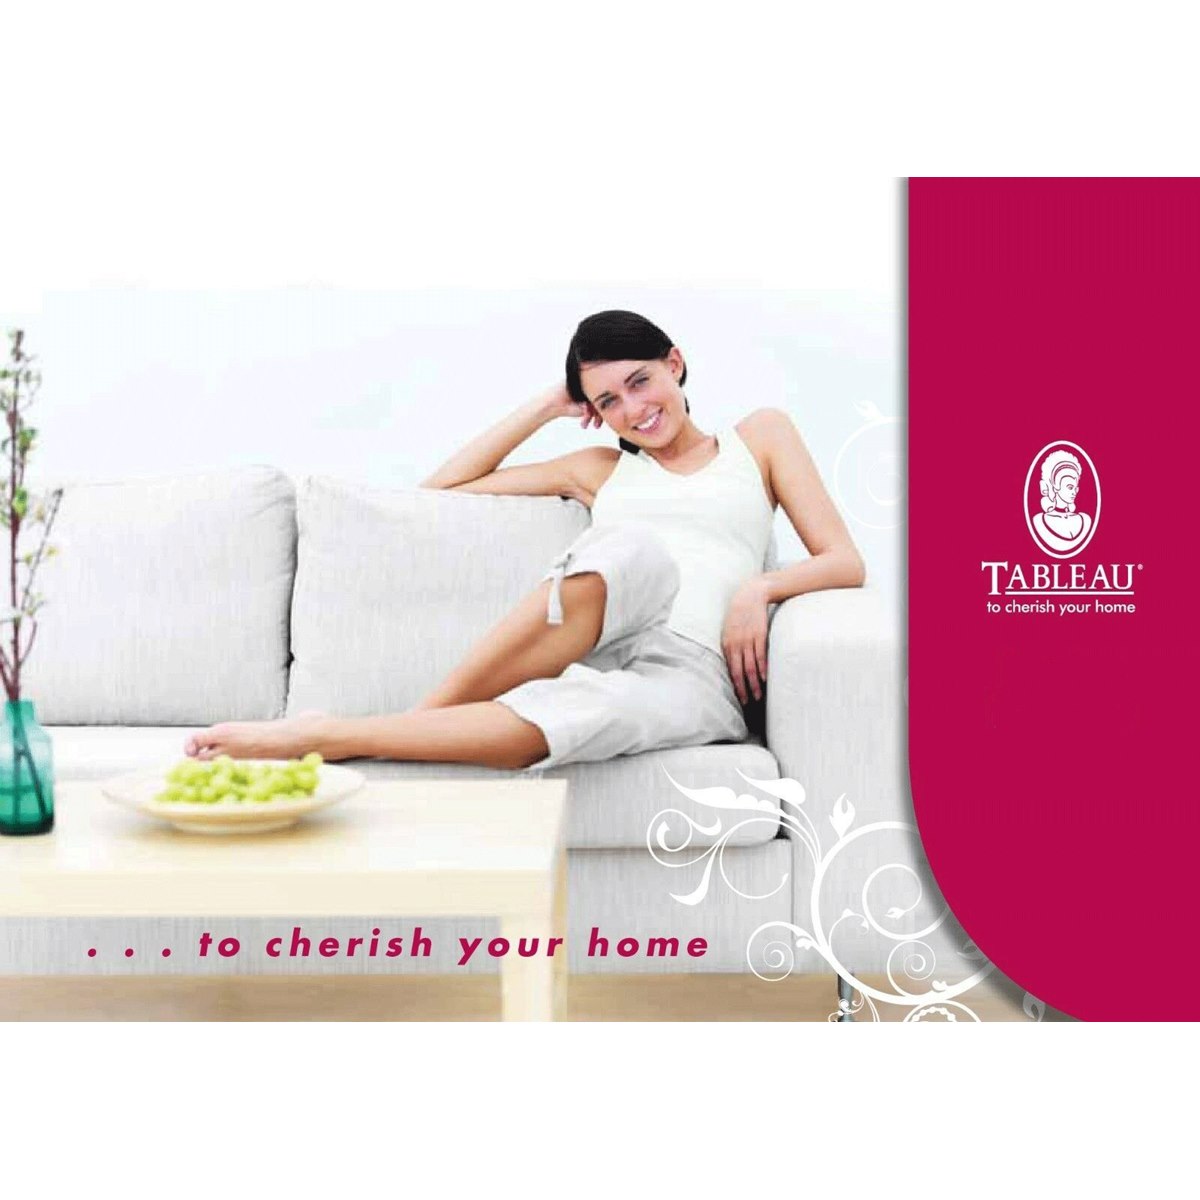 Where to Buy Tableau Cleaning Products